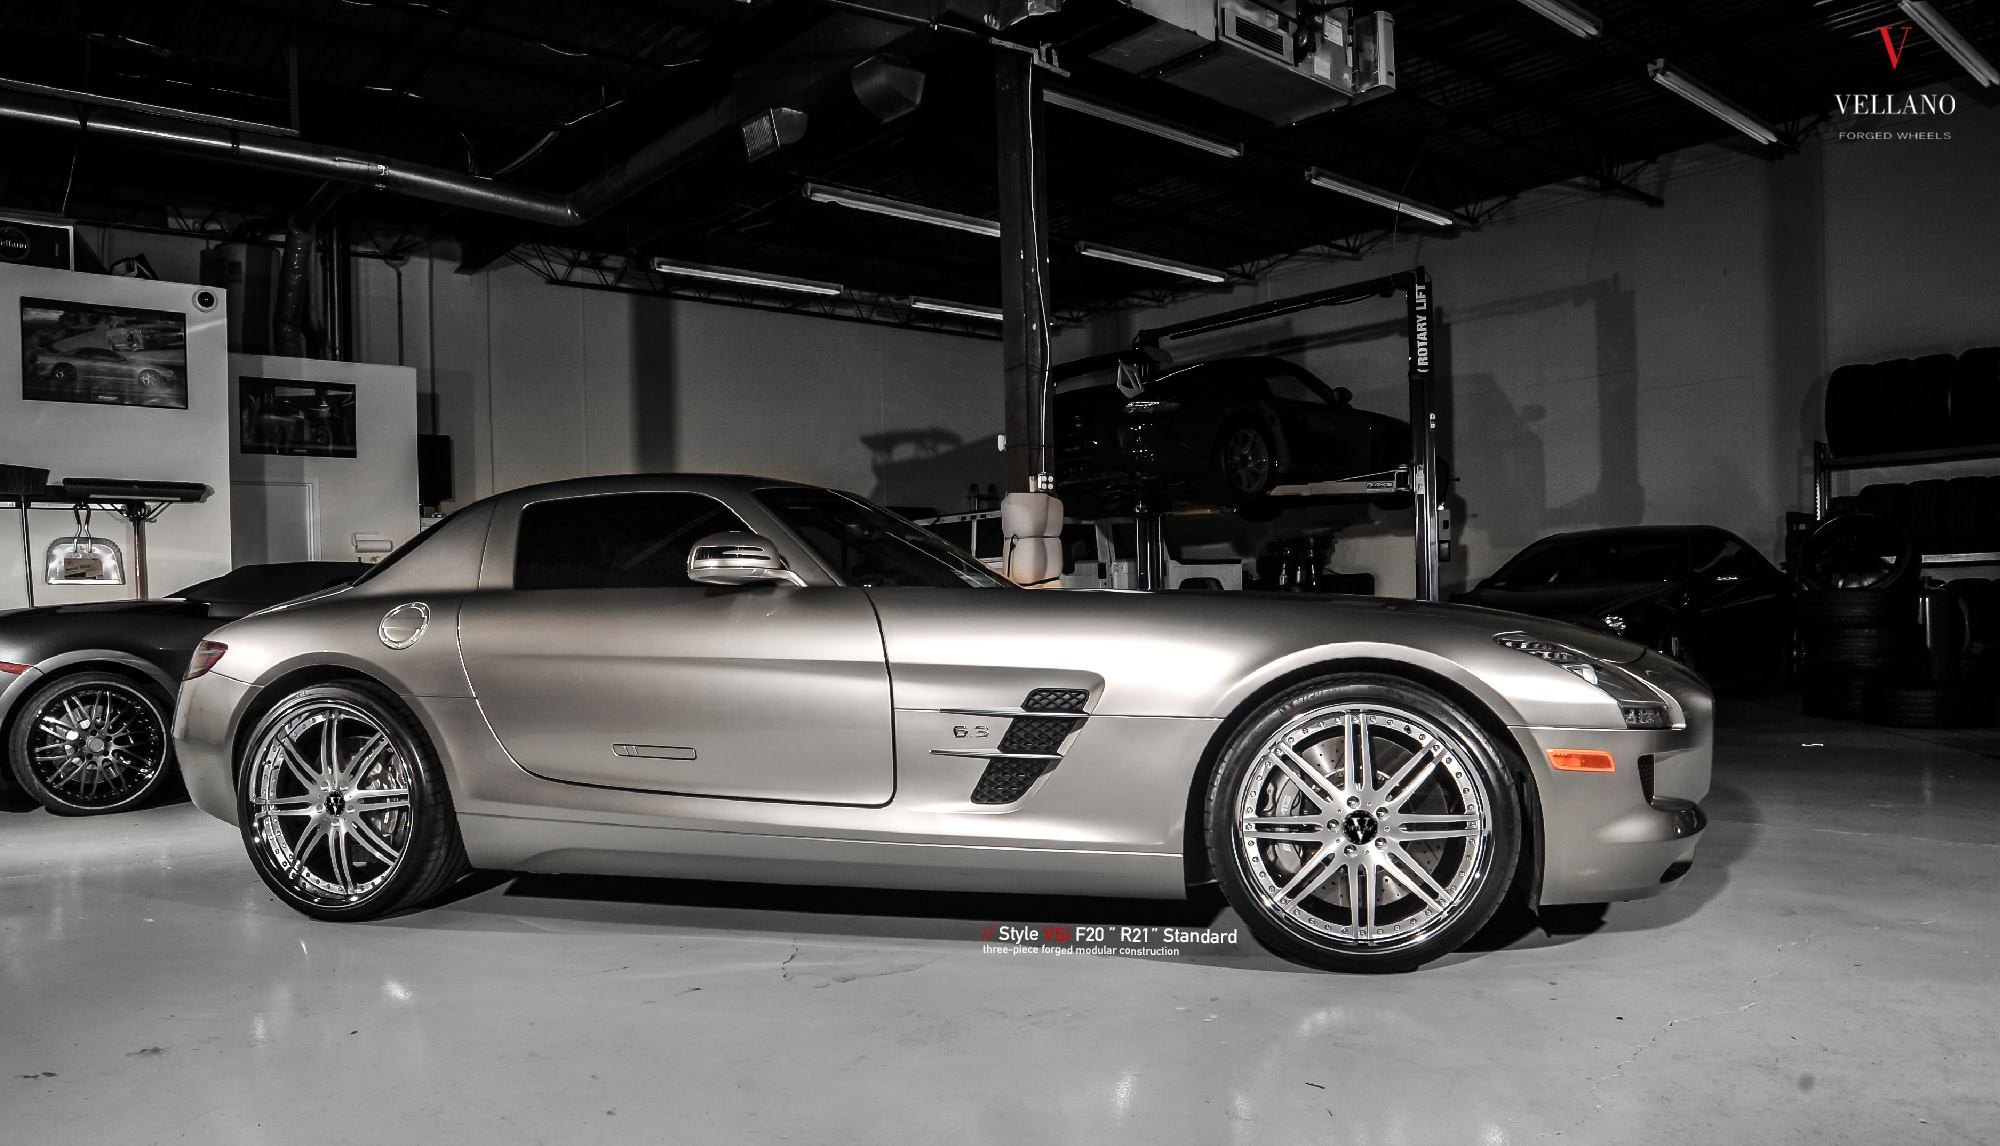 Bumper Air Ducts on Gray Mercedes SLS-Class - Photo by Vellano